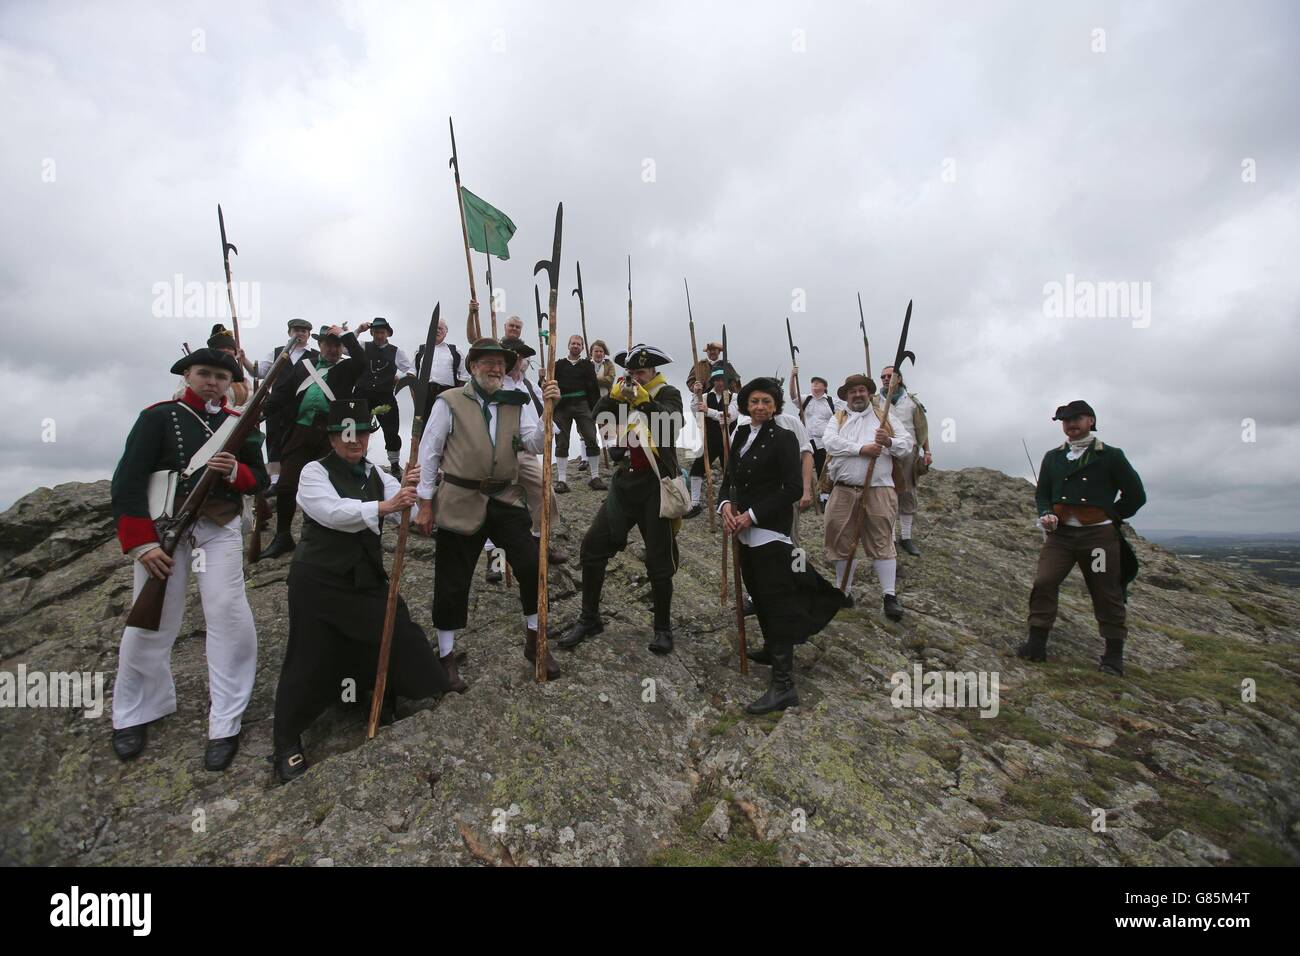 STANDALONE Photo. Re-enactors on Vinegar Hill before the annual Vinegar Hill Battle, the largest battle re-enactment in Ireland at Enniscorthy, Co Wexford. Stock Photo